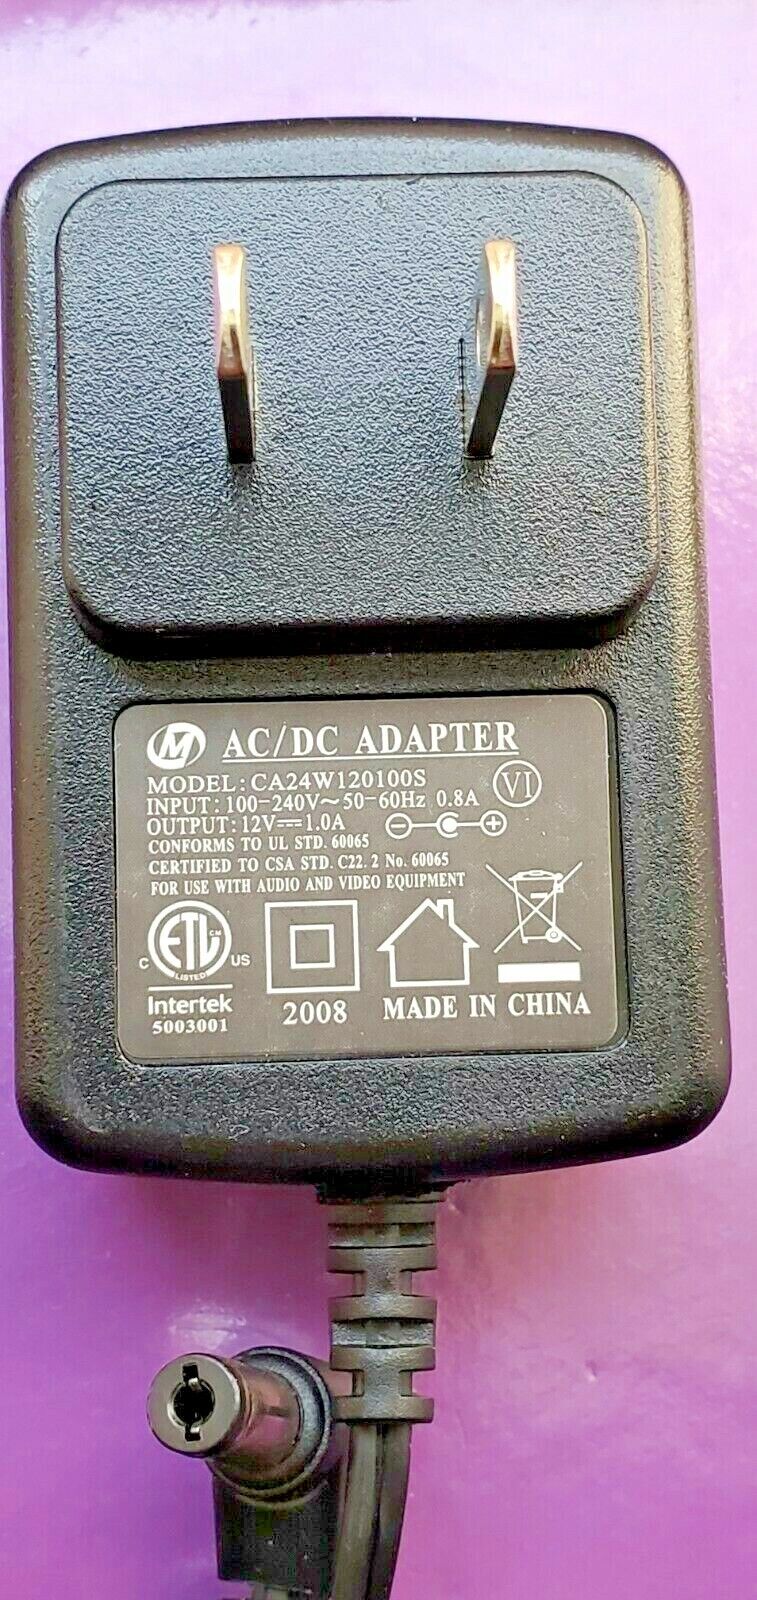 AC/DC 12V Power Supply Adapter for Ion Premier Wireless Turntable LP Vinyl Playe Country/Region of Manufacture: China